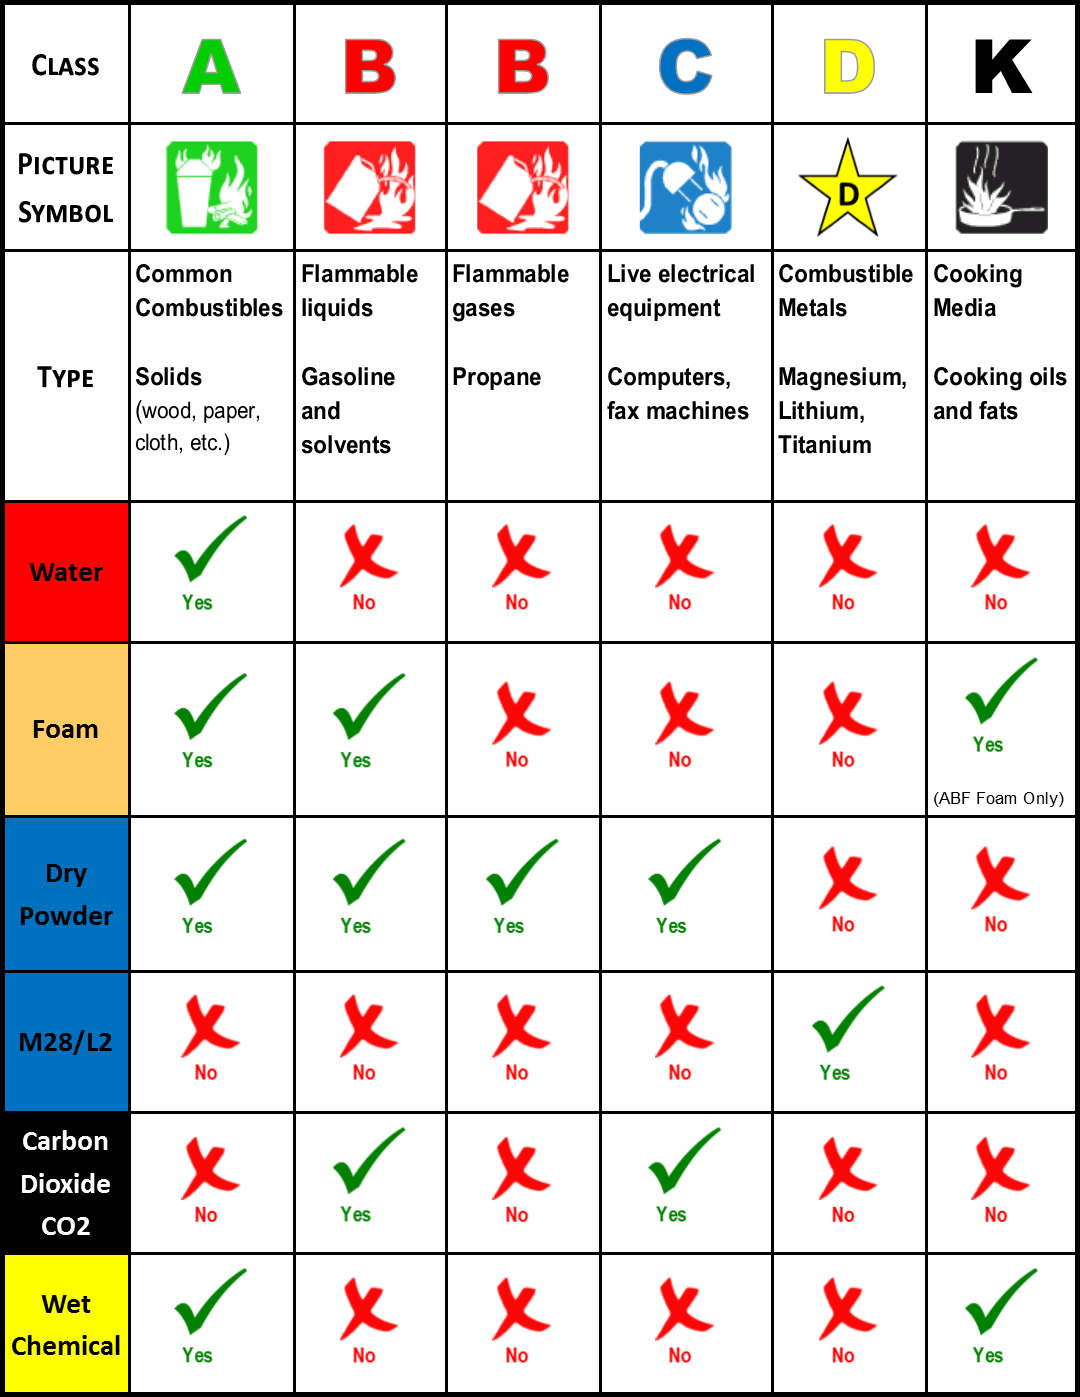 Fire Extinguisher Types Chart